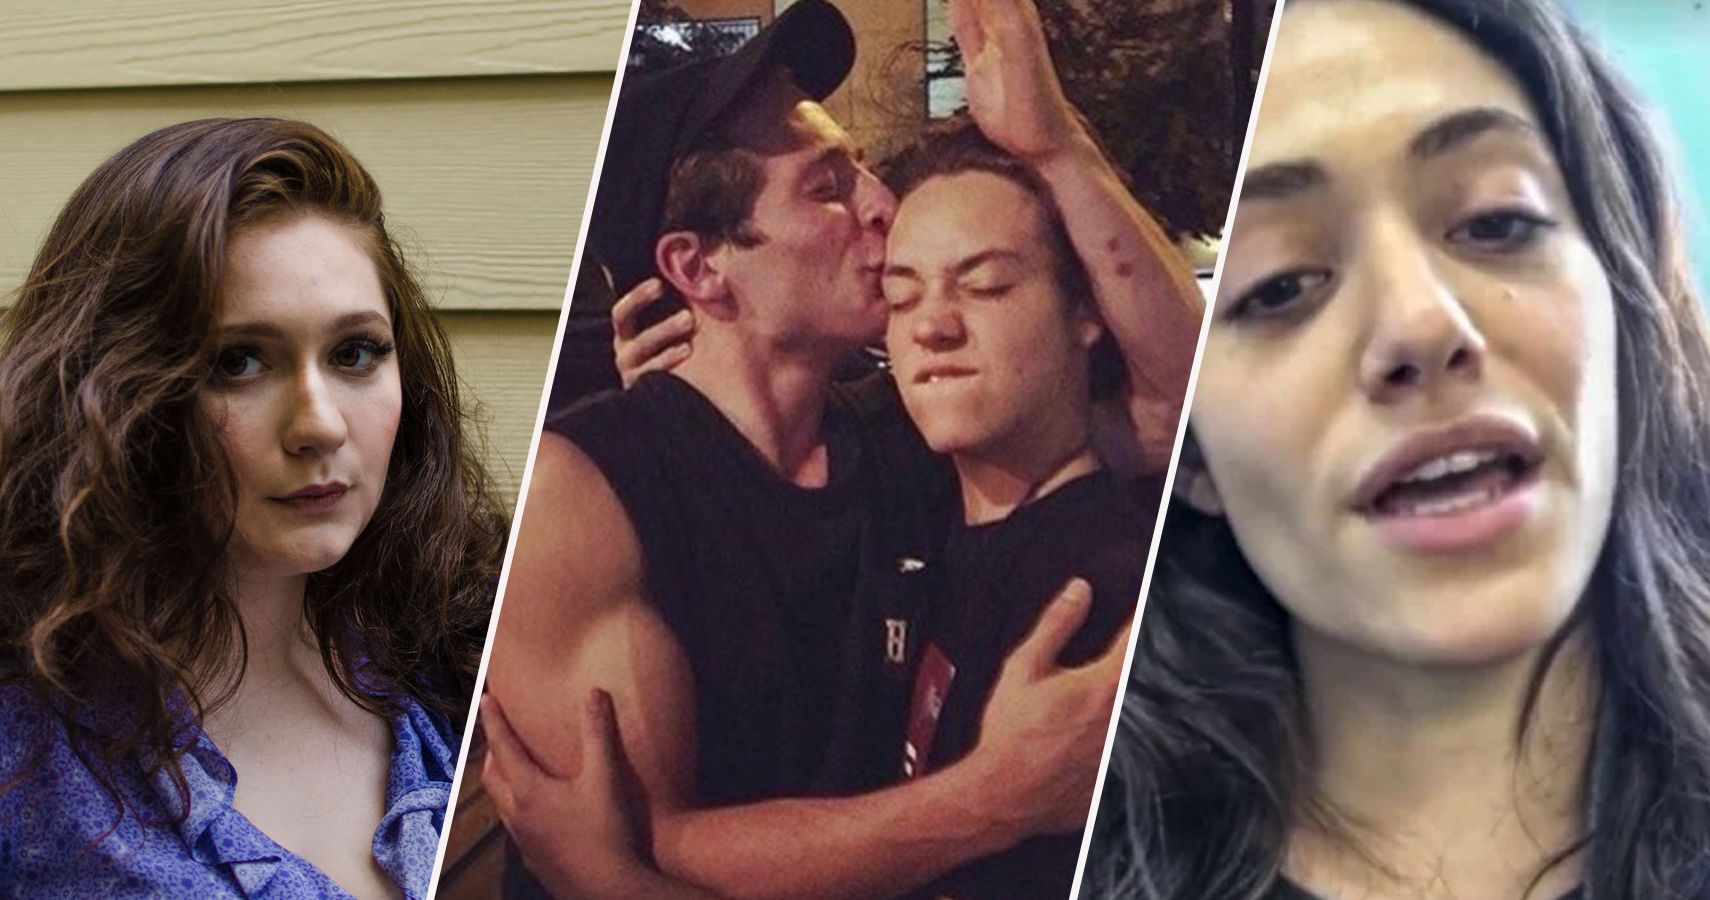 20 Dark Secrets The Shameless Cast Tried To Hide From Superfans 3407